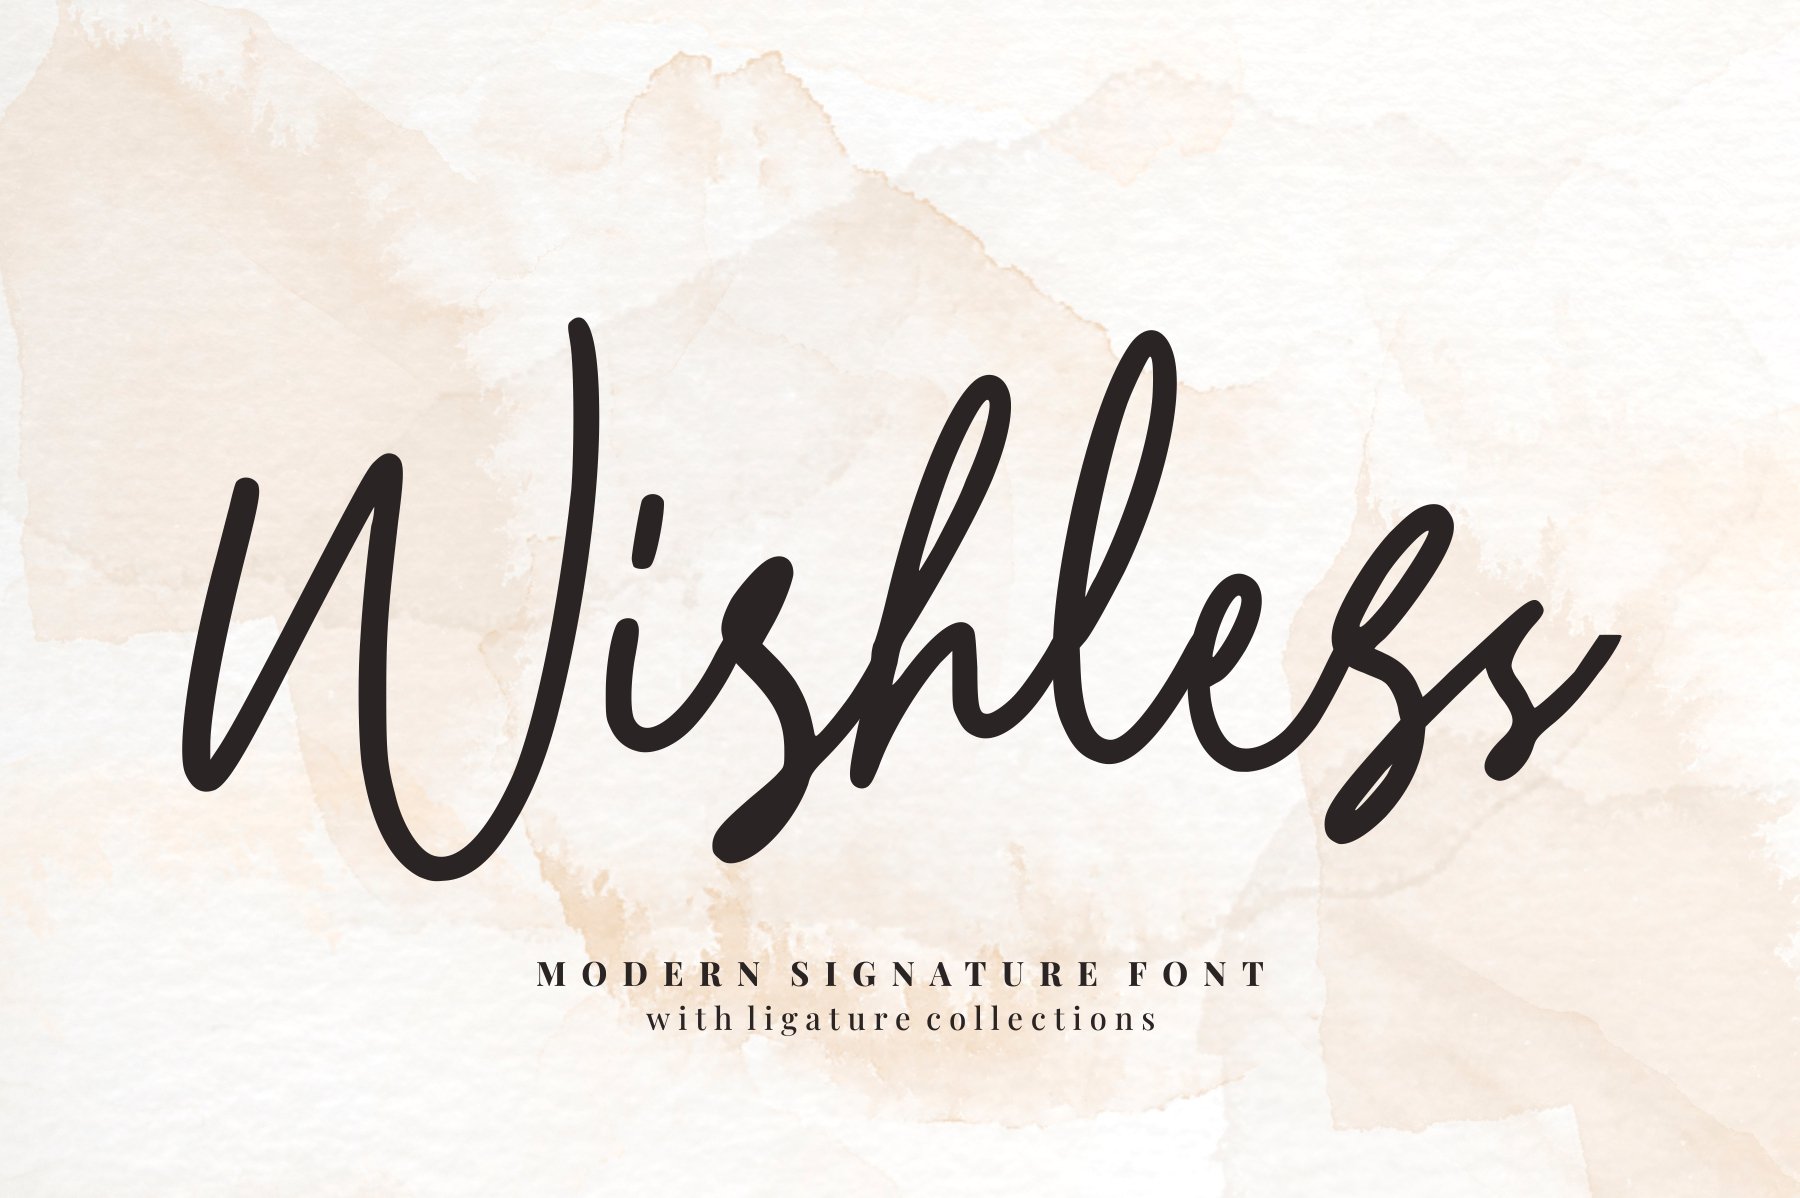 Wishless - Modern Signature Font cover image.